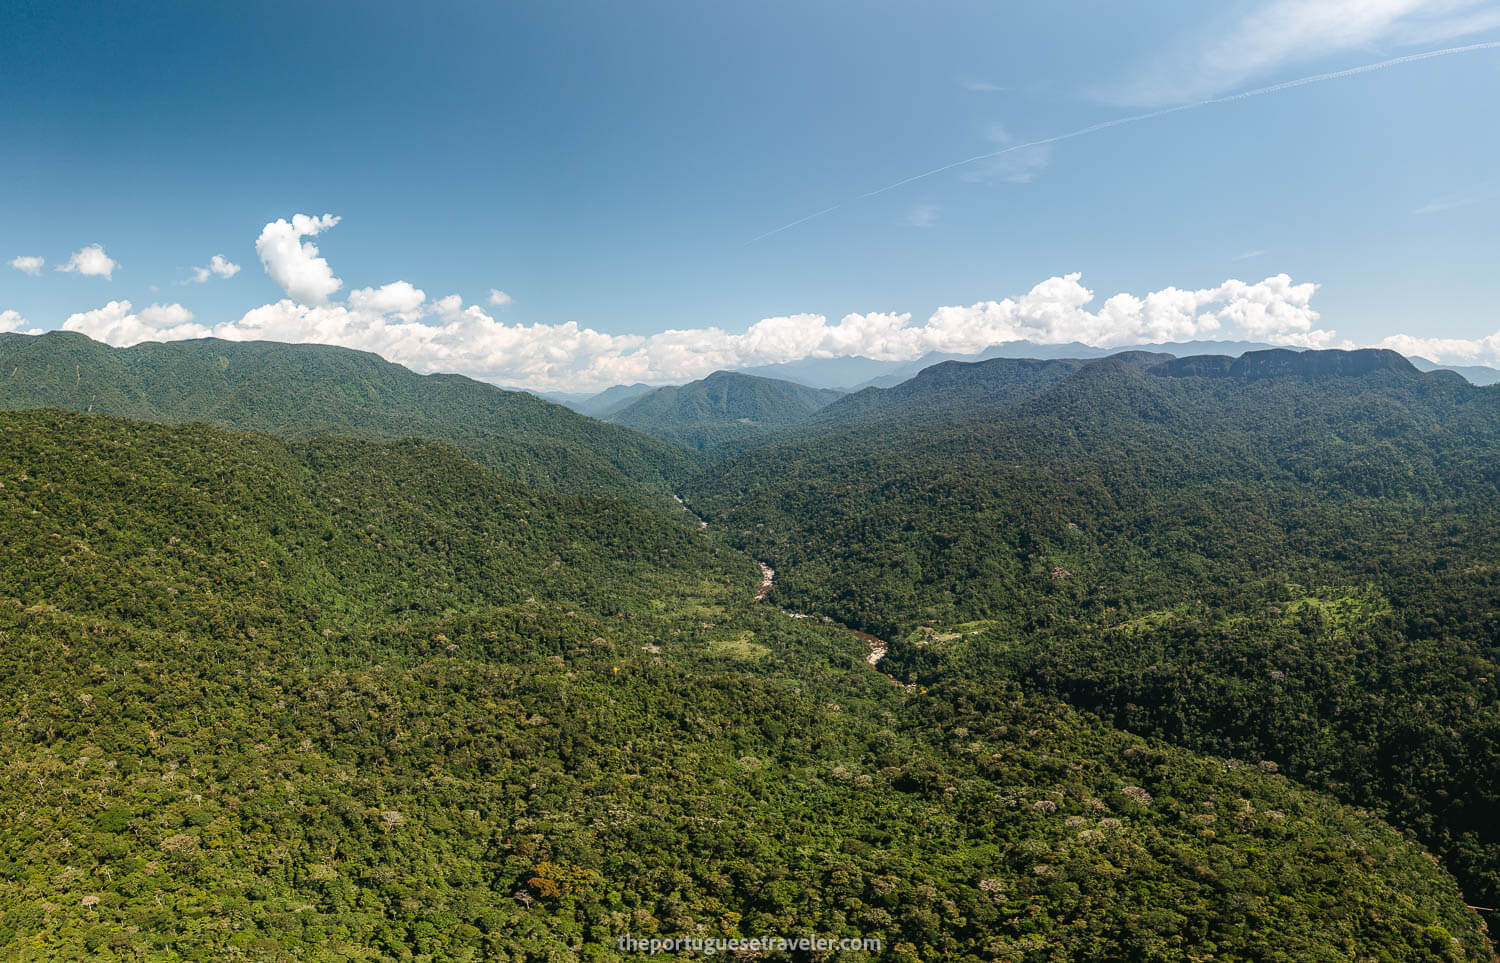 The view of the surroundings from above, on the Cueva de Los Tayos expedition.